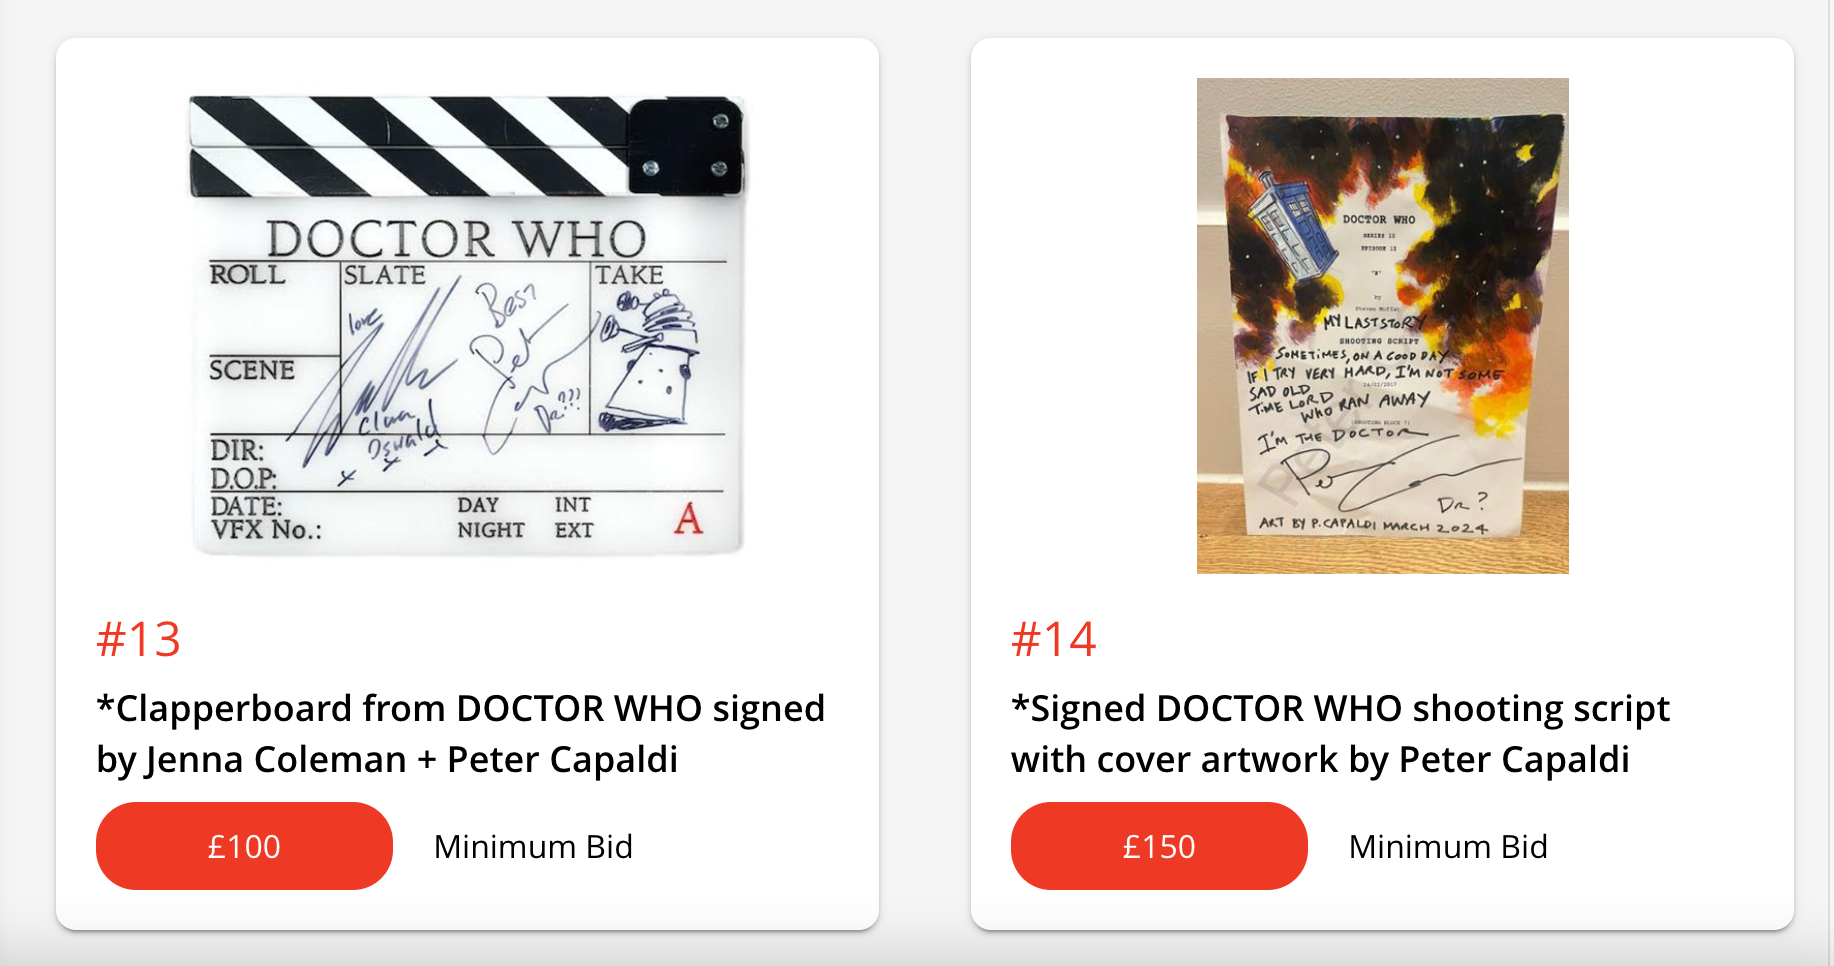 ‘Doctor Who’ fans will want to snap up these Cinema for Gaza auction items